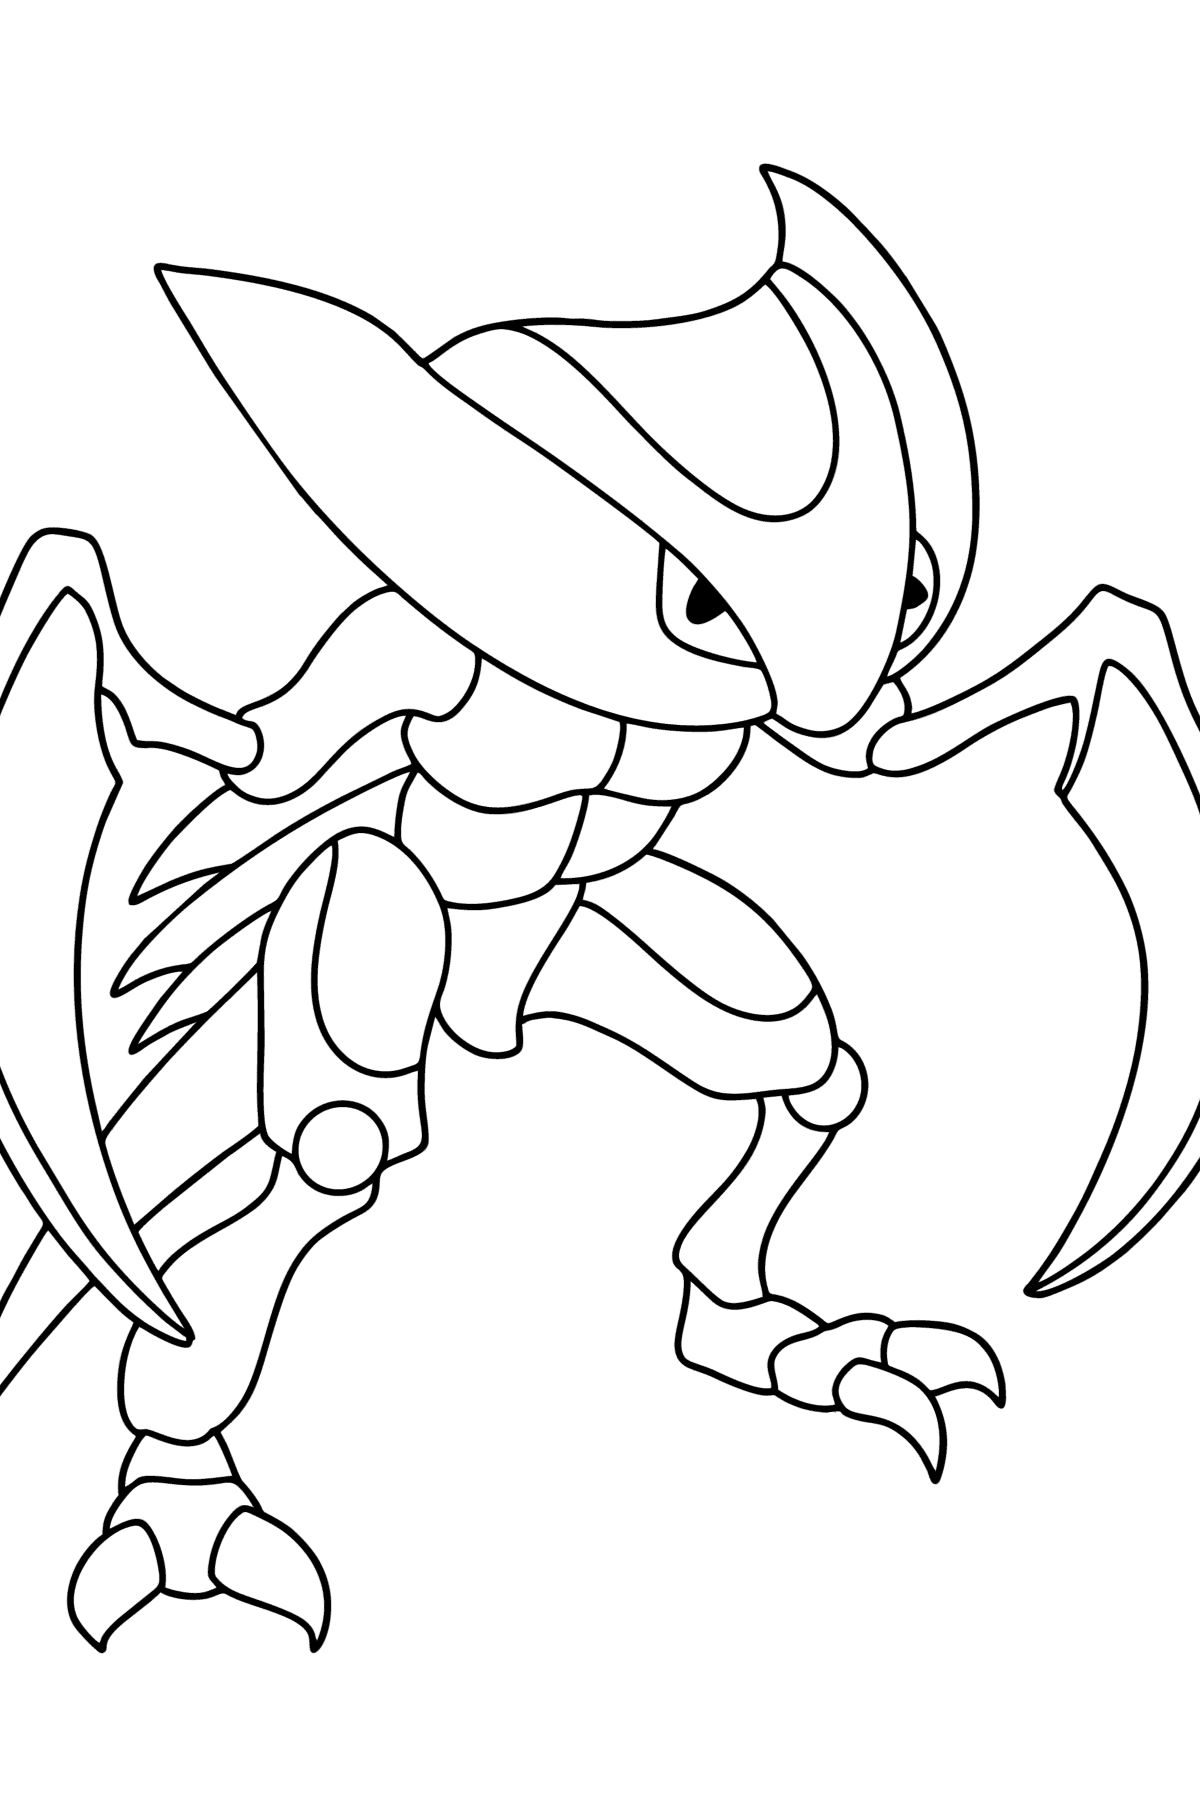 Colouring page Pokémon X and Y Kabutops - Coloring Pages for Kids